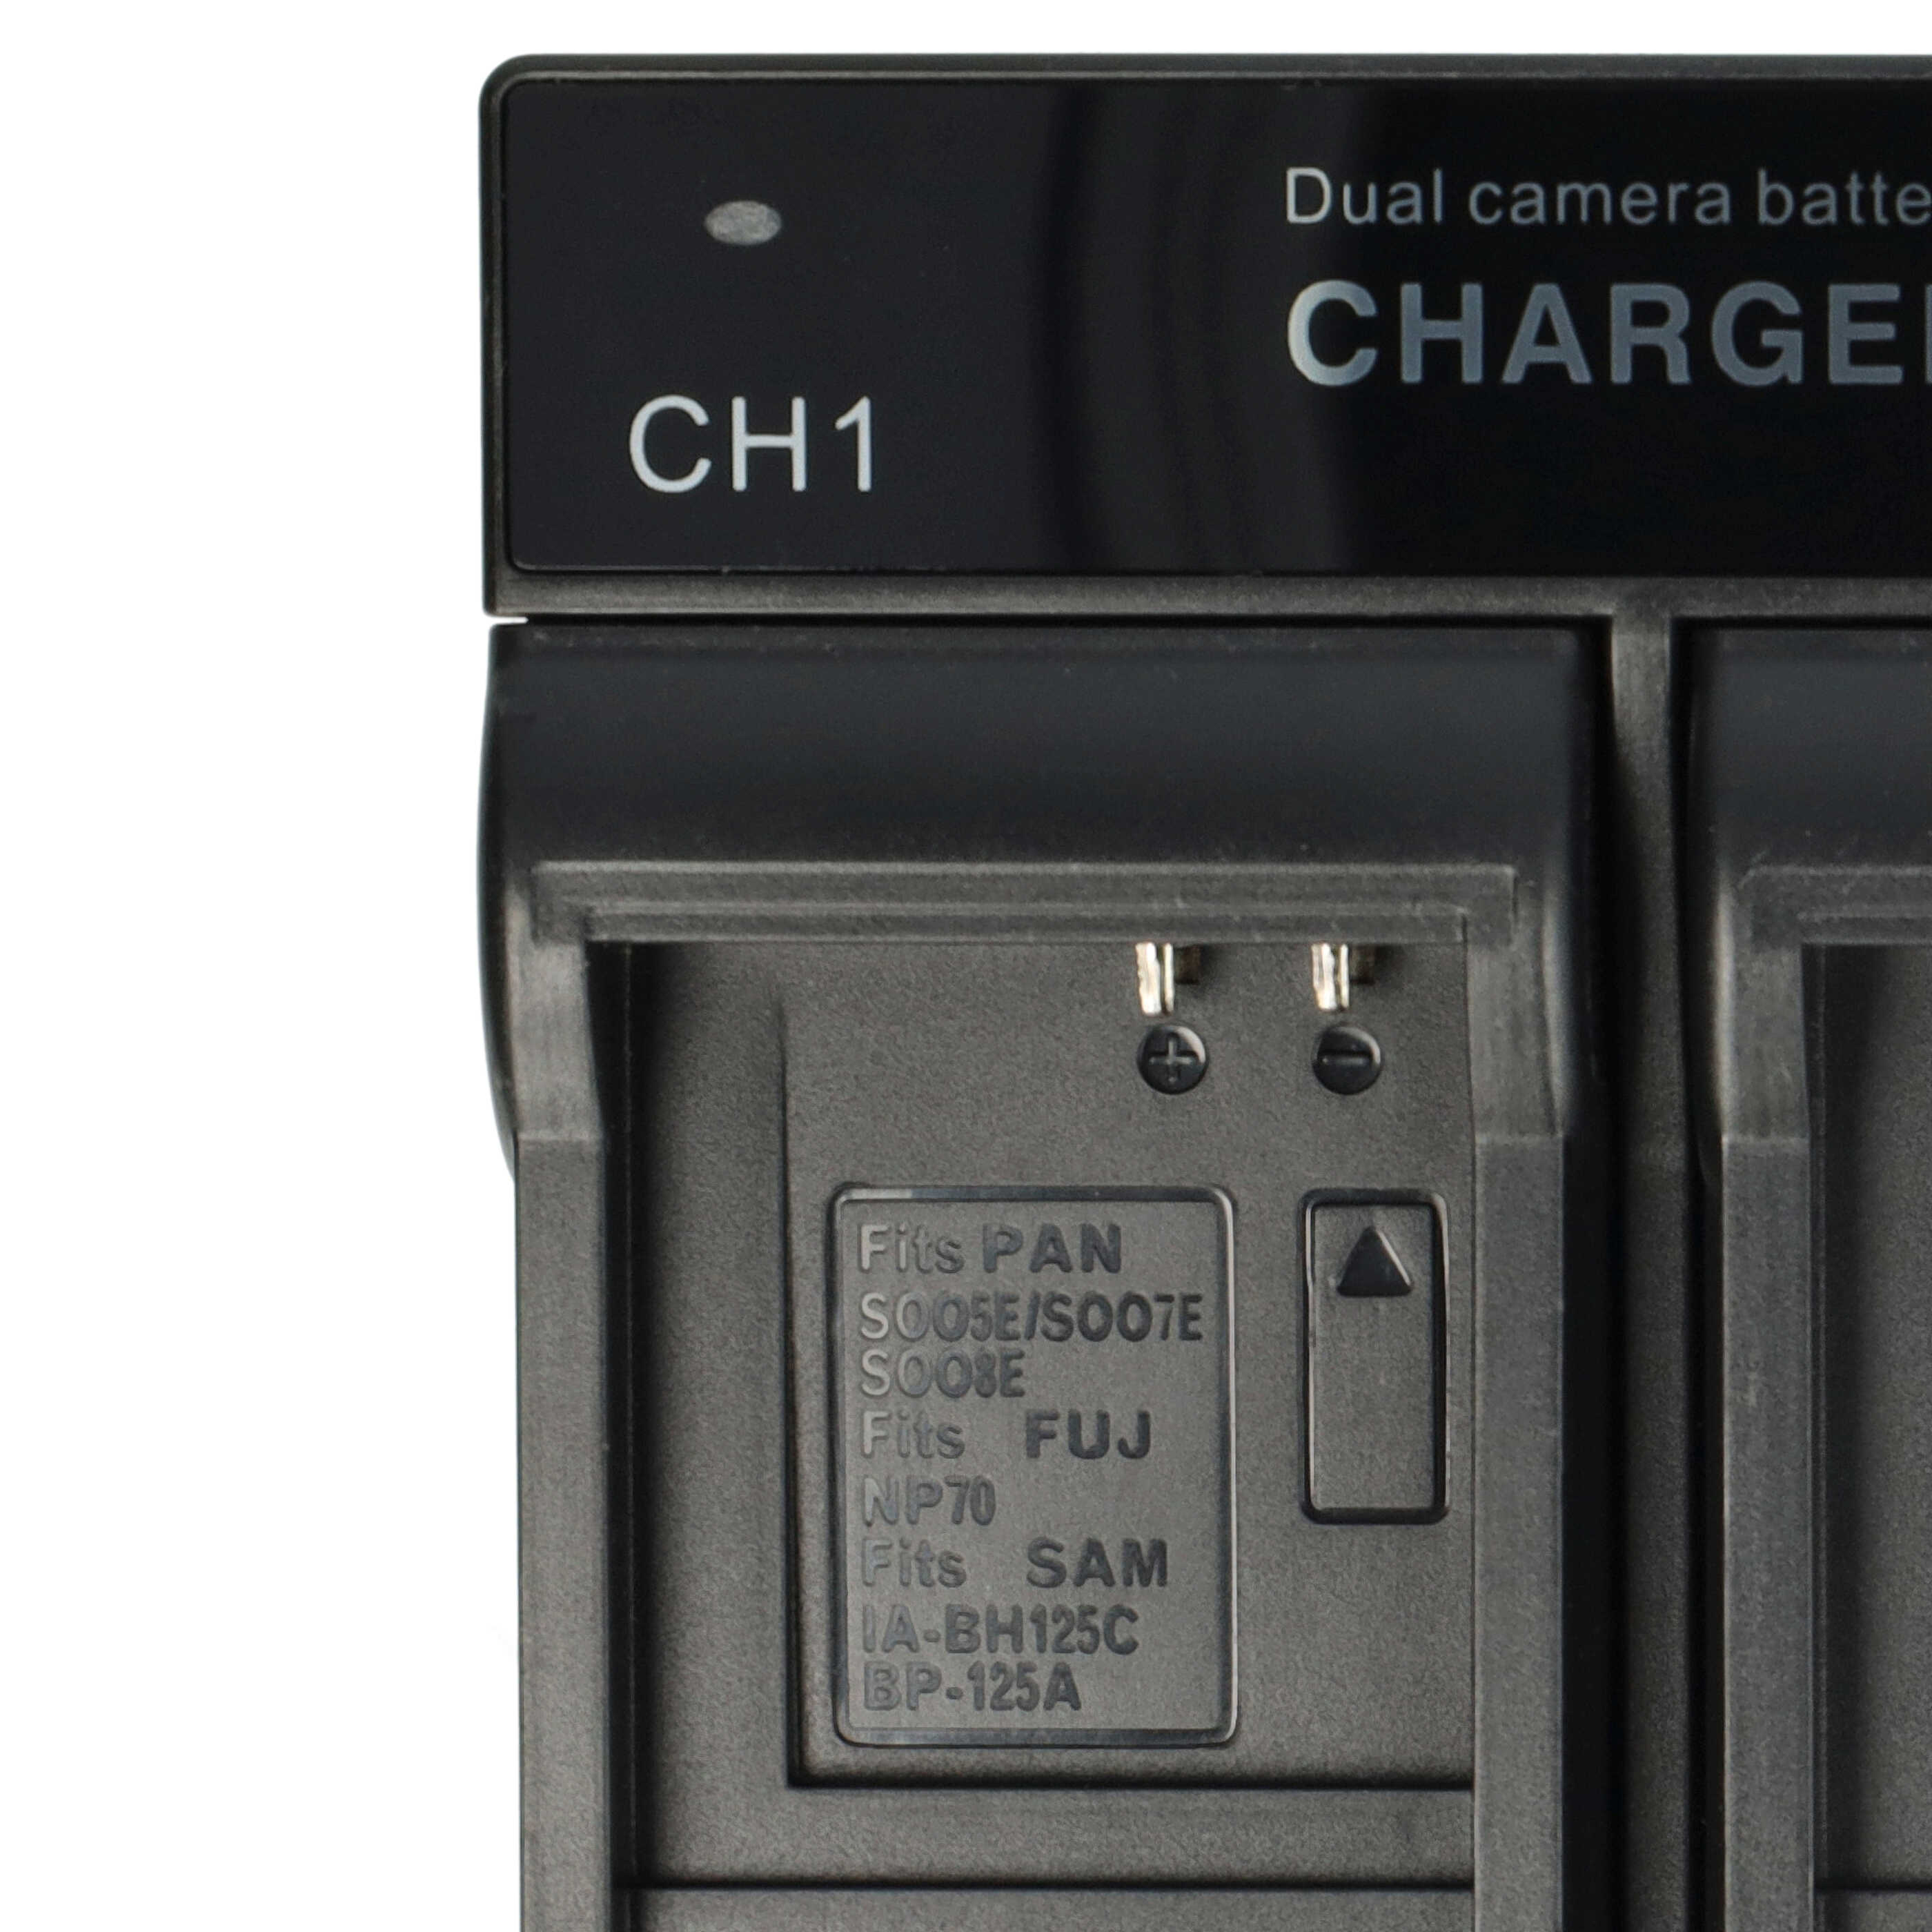 Battery Charger suitable for Fujifilm Digital Camera - 0.5 / 0.9 A, 4.2/8.4 V